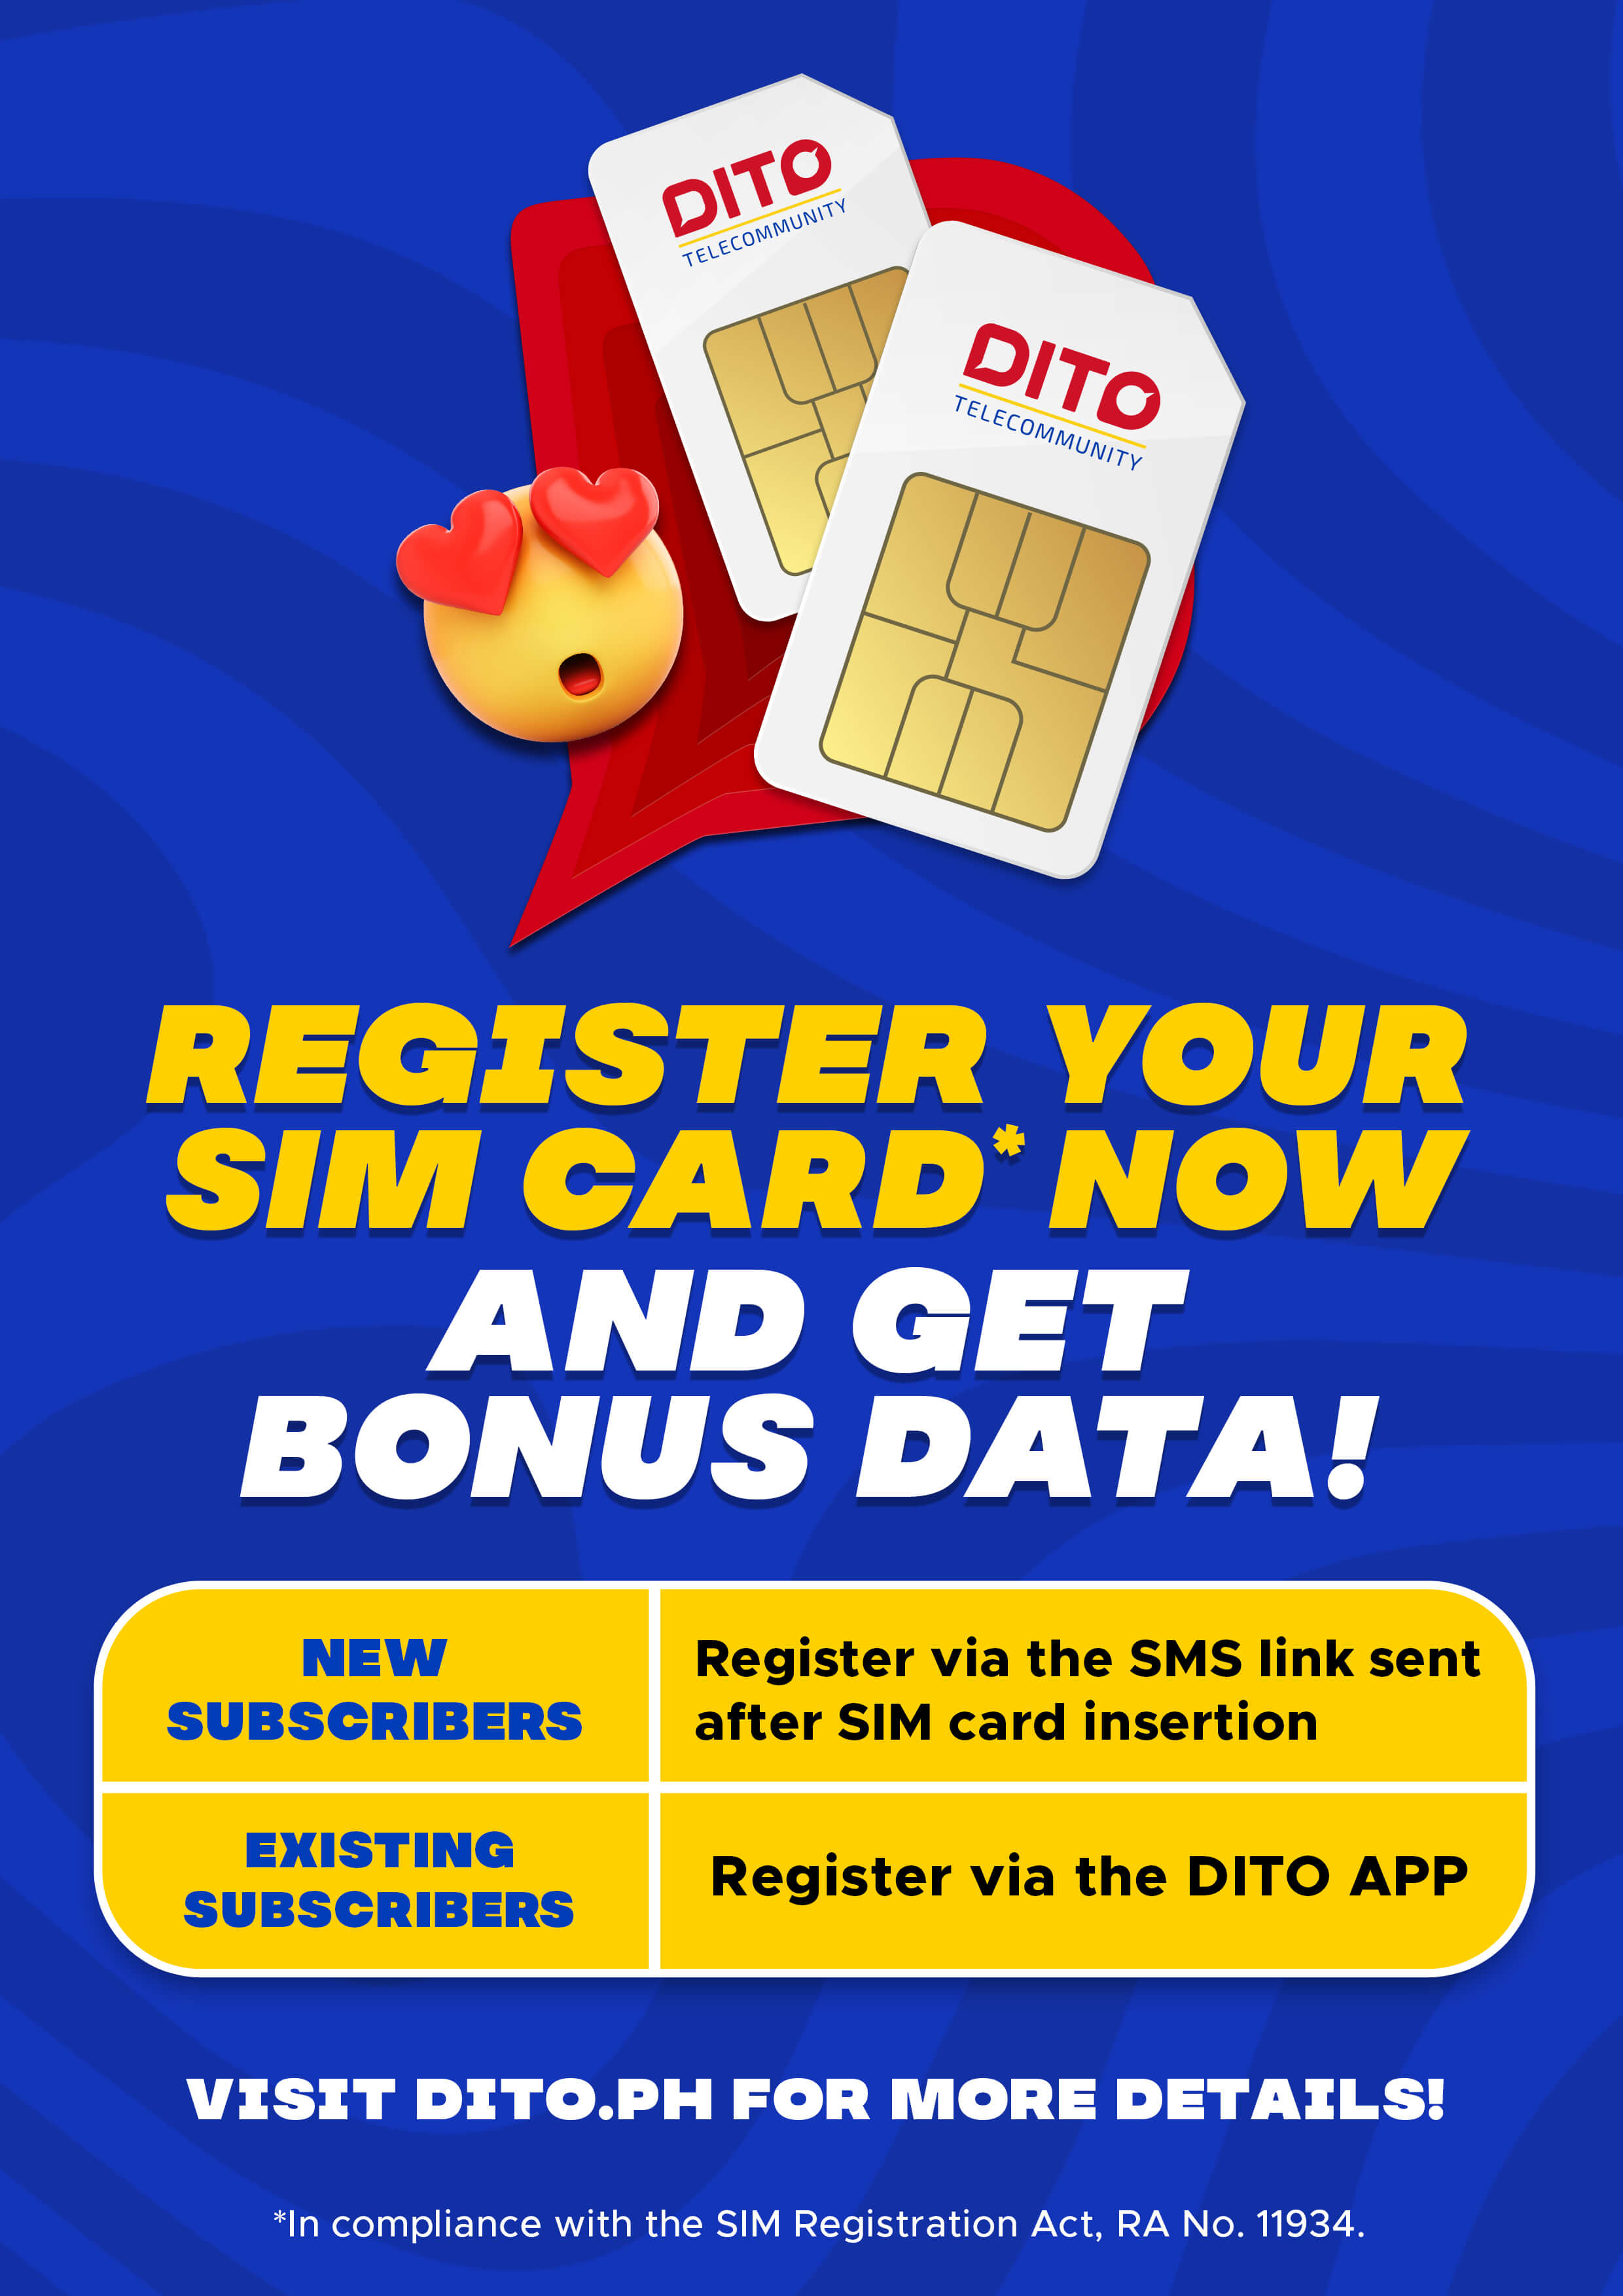 Register your DITO SIM in 3 easy steps and claim your bonus data now!